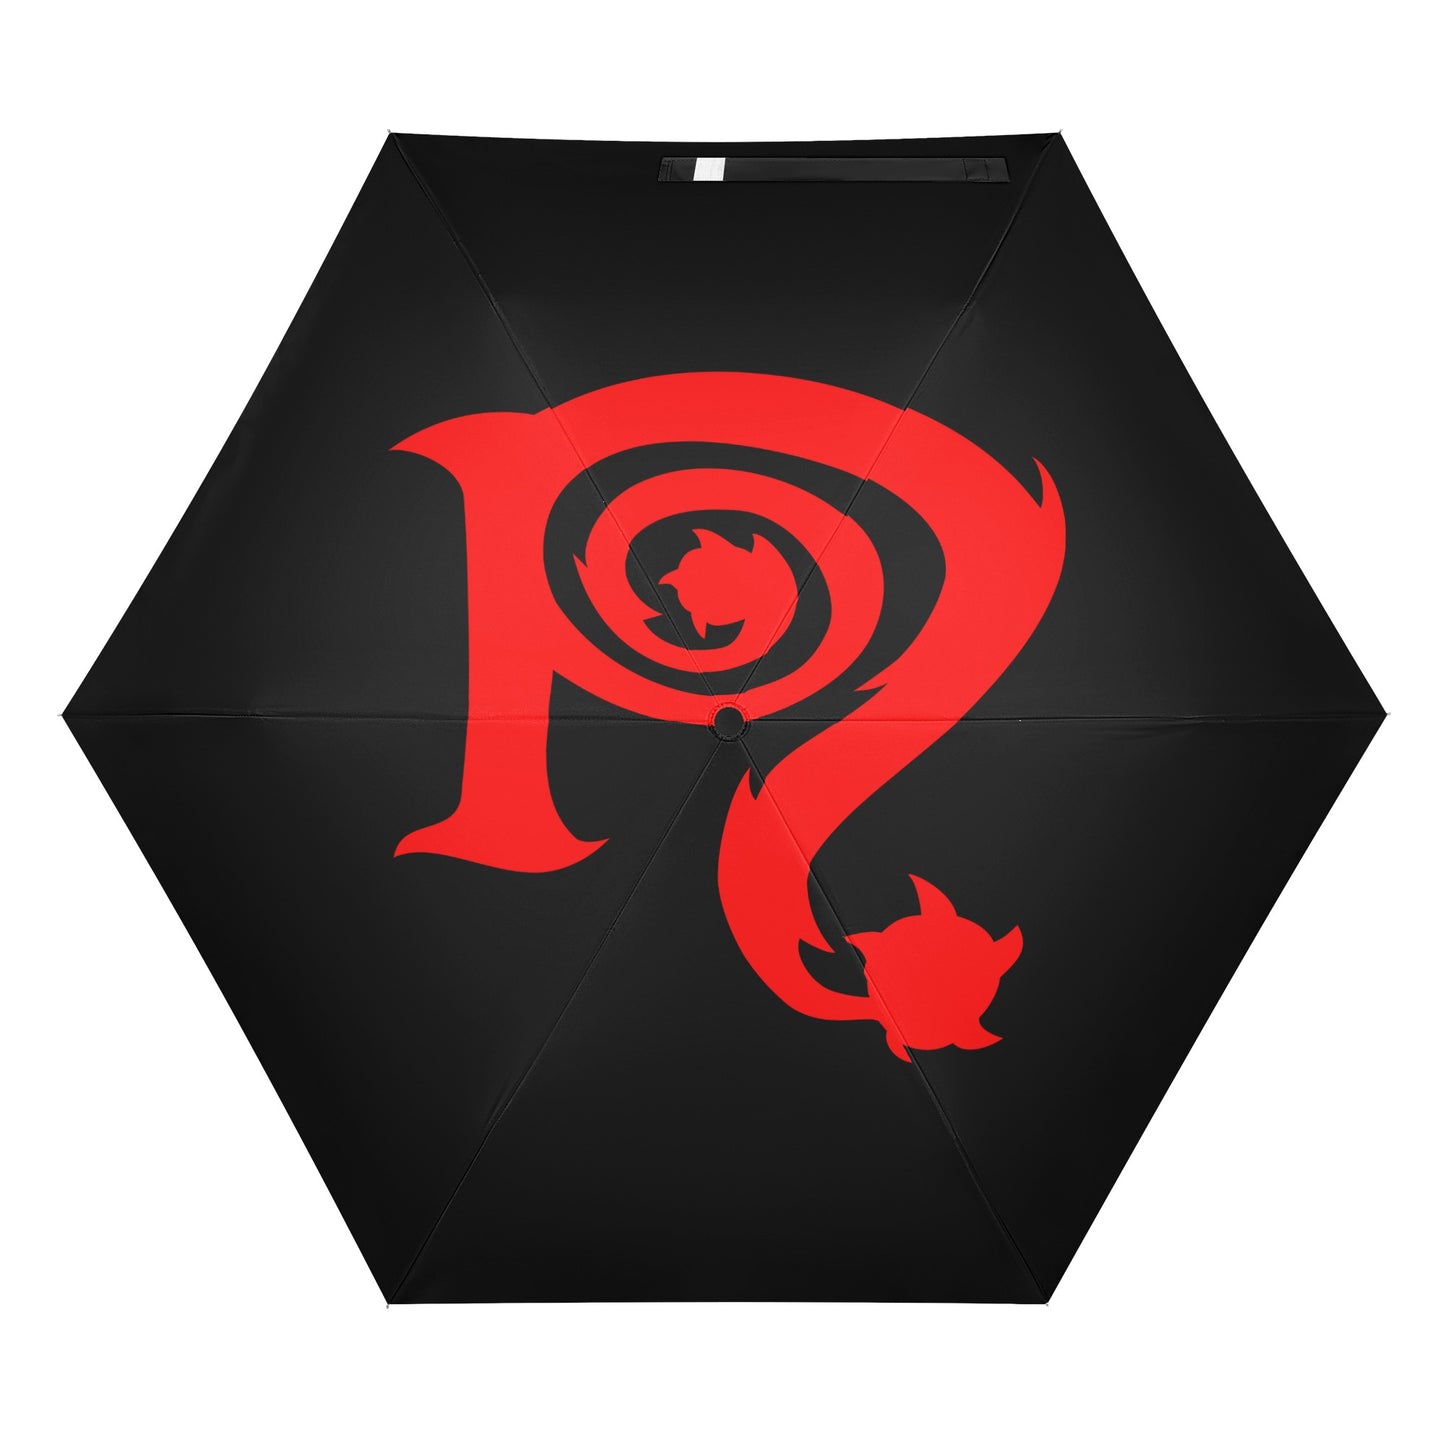 Necro - Red N - Fully Auto Open & Close Umbrella Printing Outside